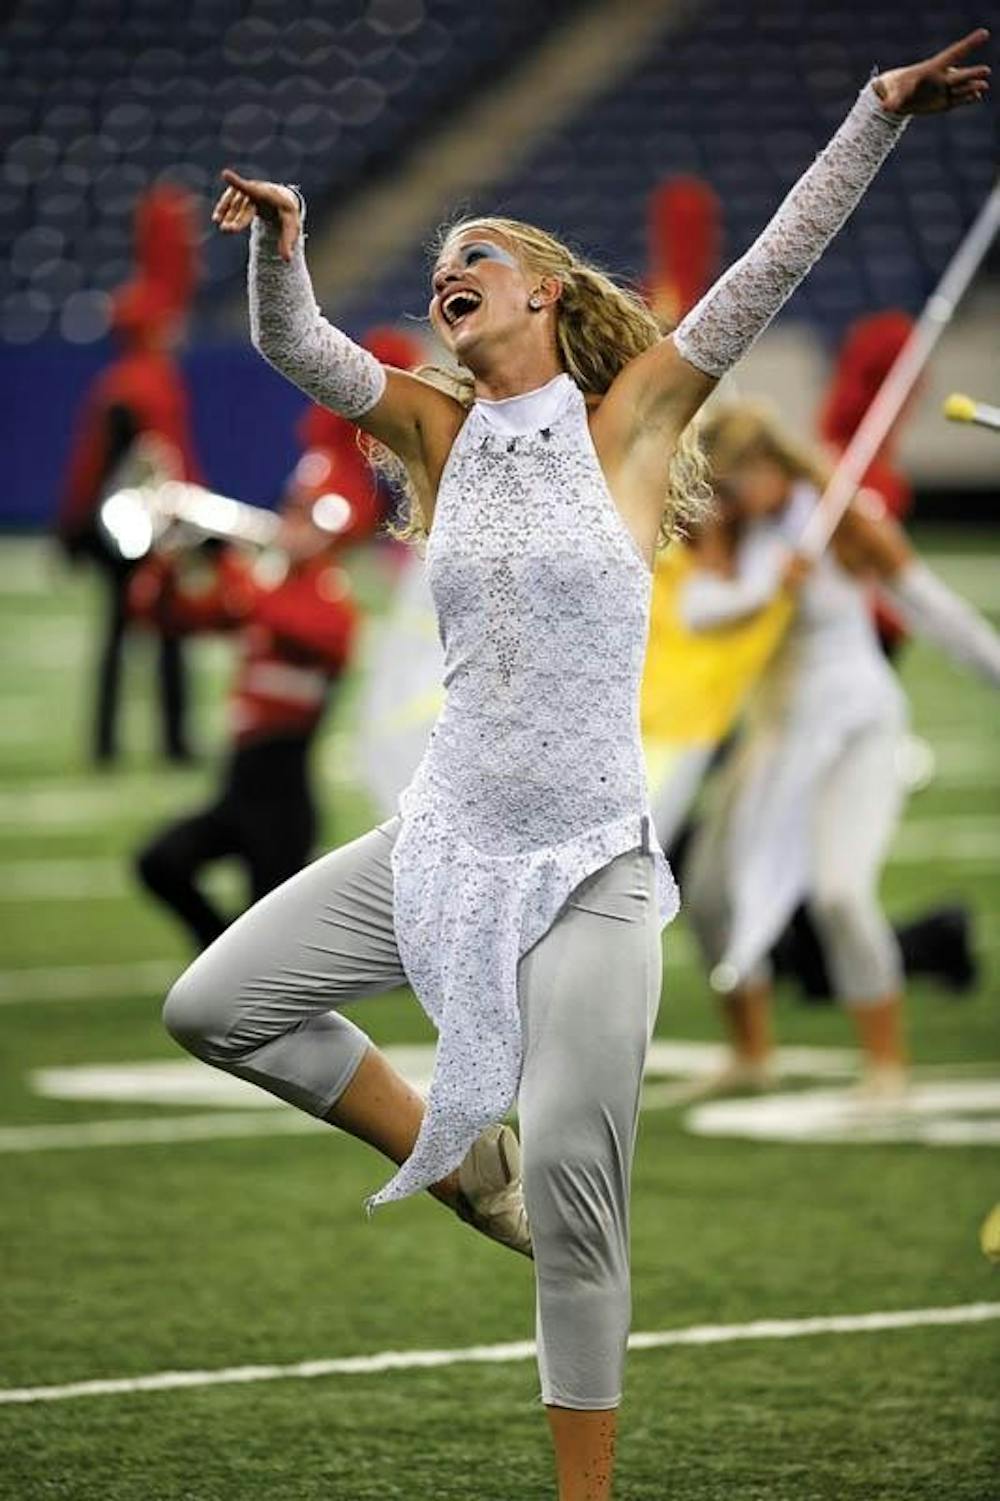 The Drum Corps International World Championships are taking place Aug. 7-9 at IU's Memorial Stadium.